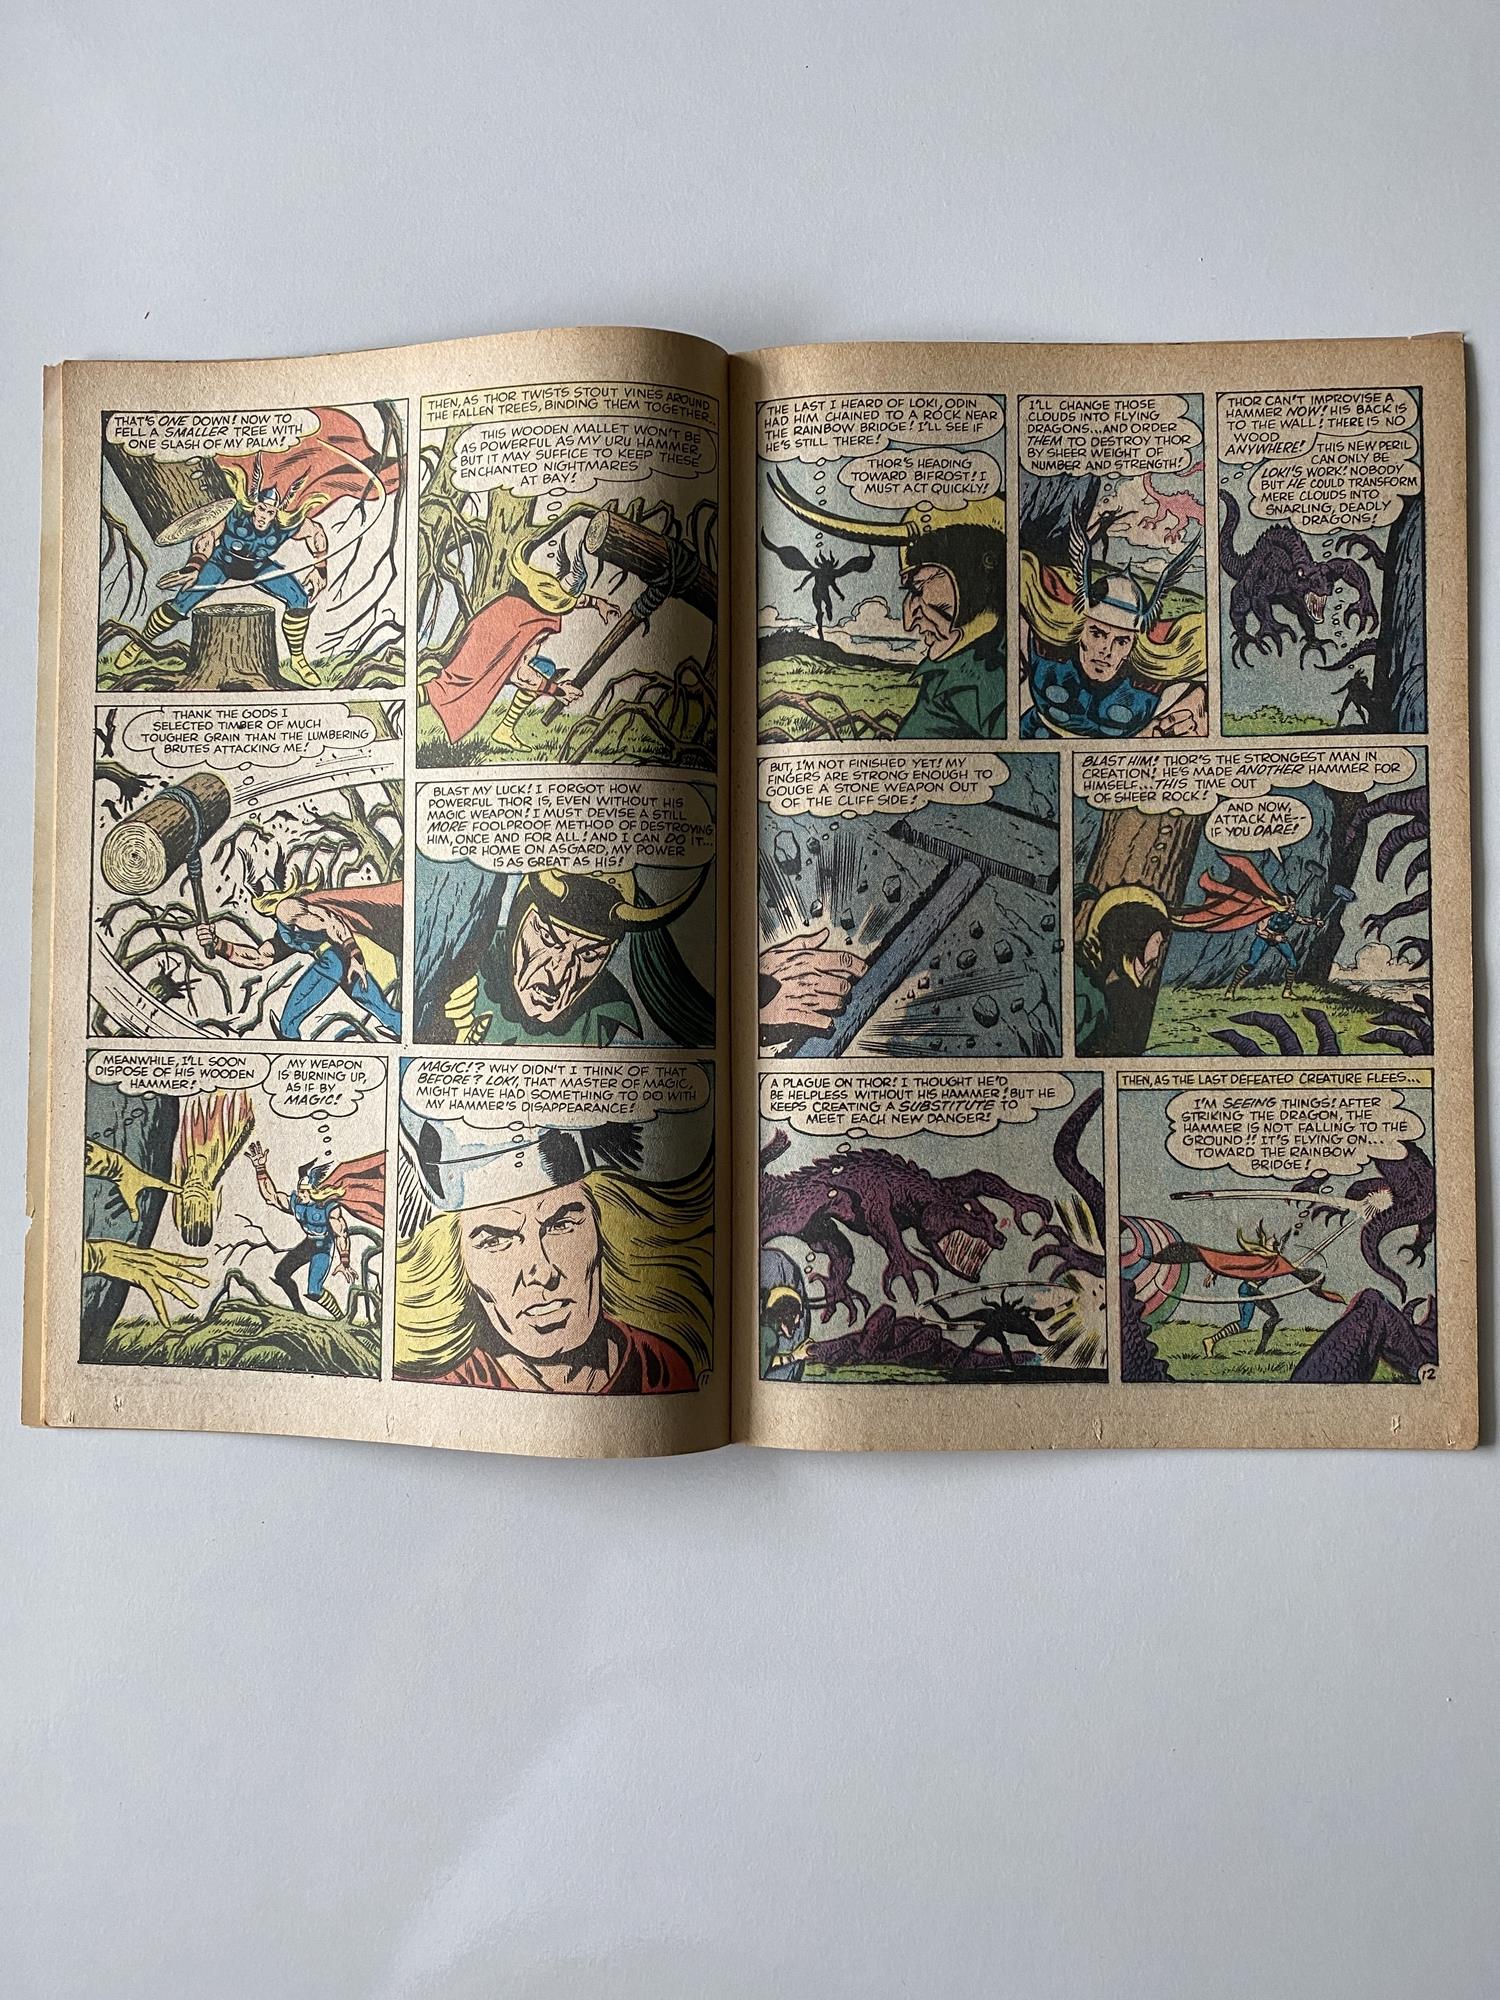 JOURNEY INTO MYSTERY # 92 - (1963 - MARVEL - Pence Copy) - Thor and Loki cover by Jack Kirby + Steve - Image 5 of 7